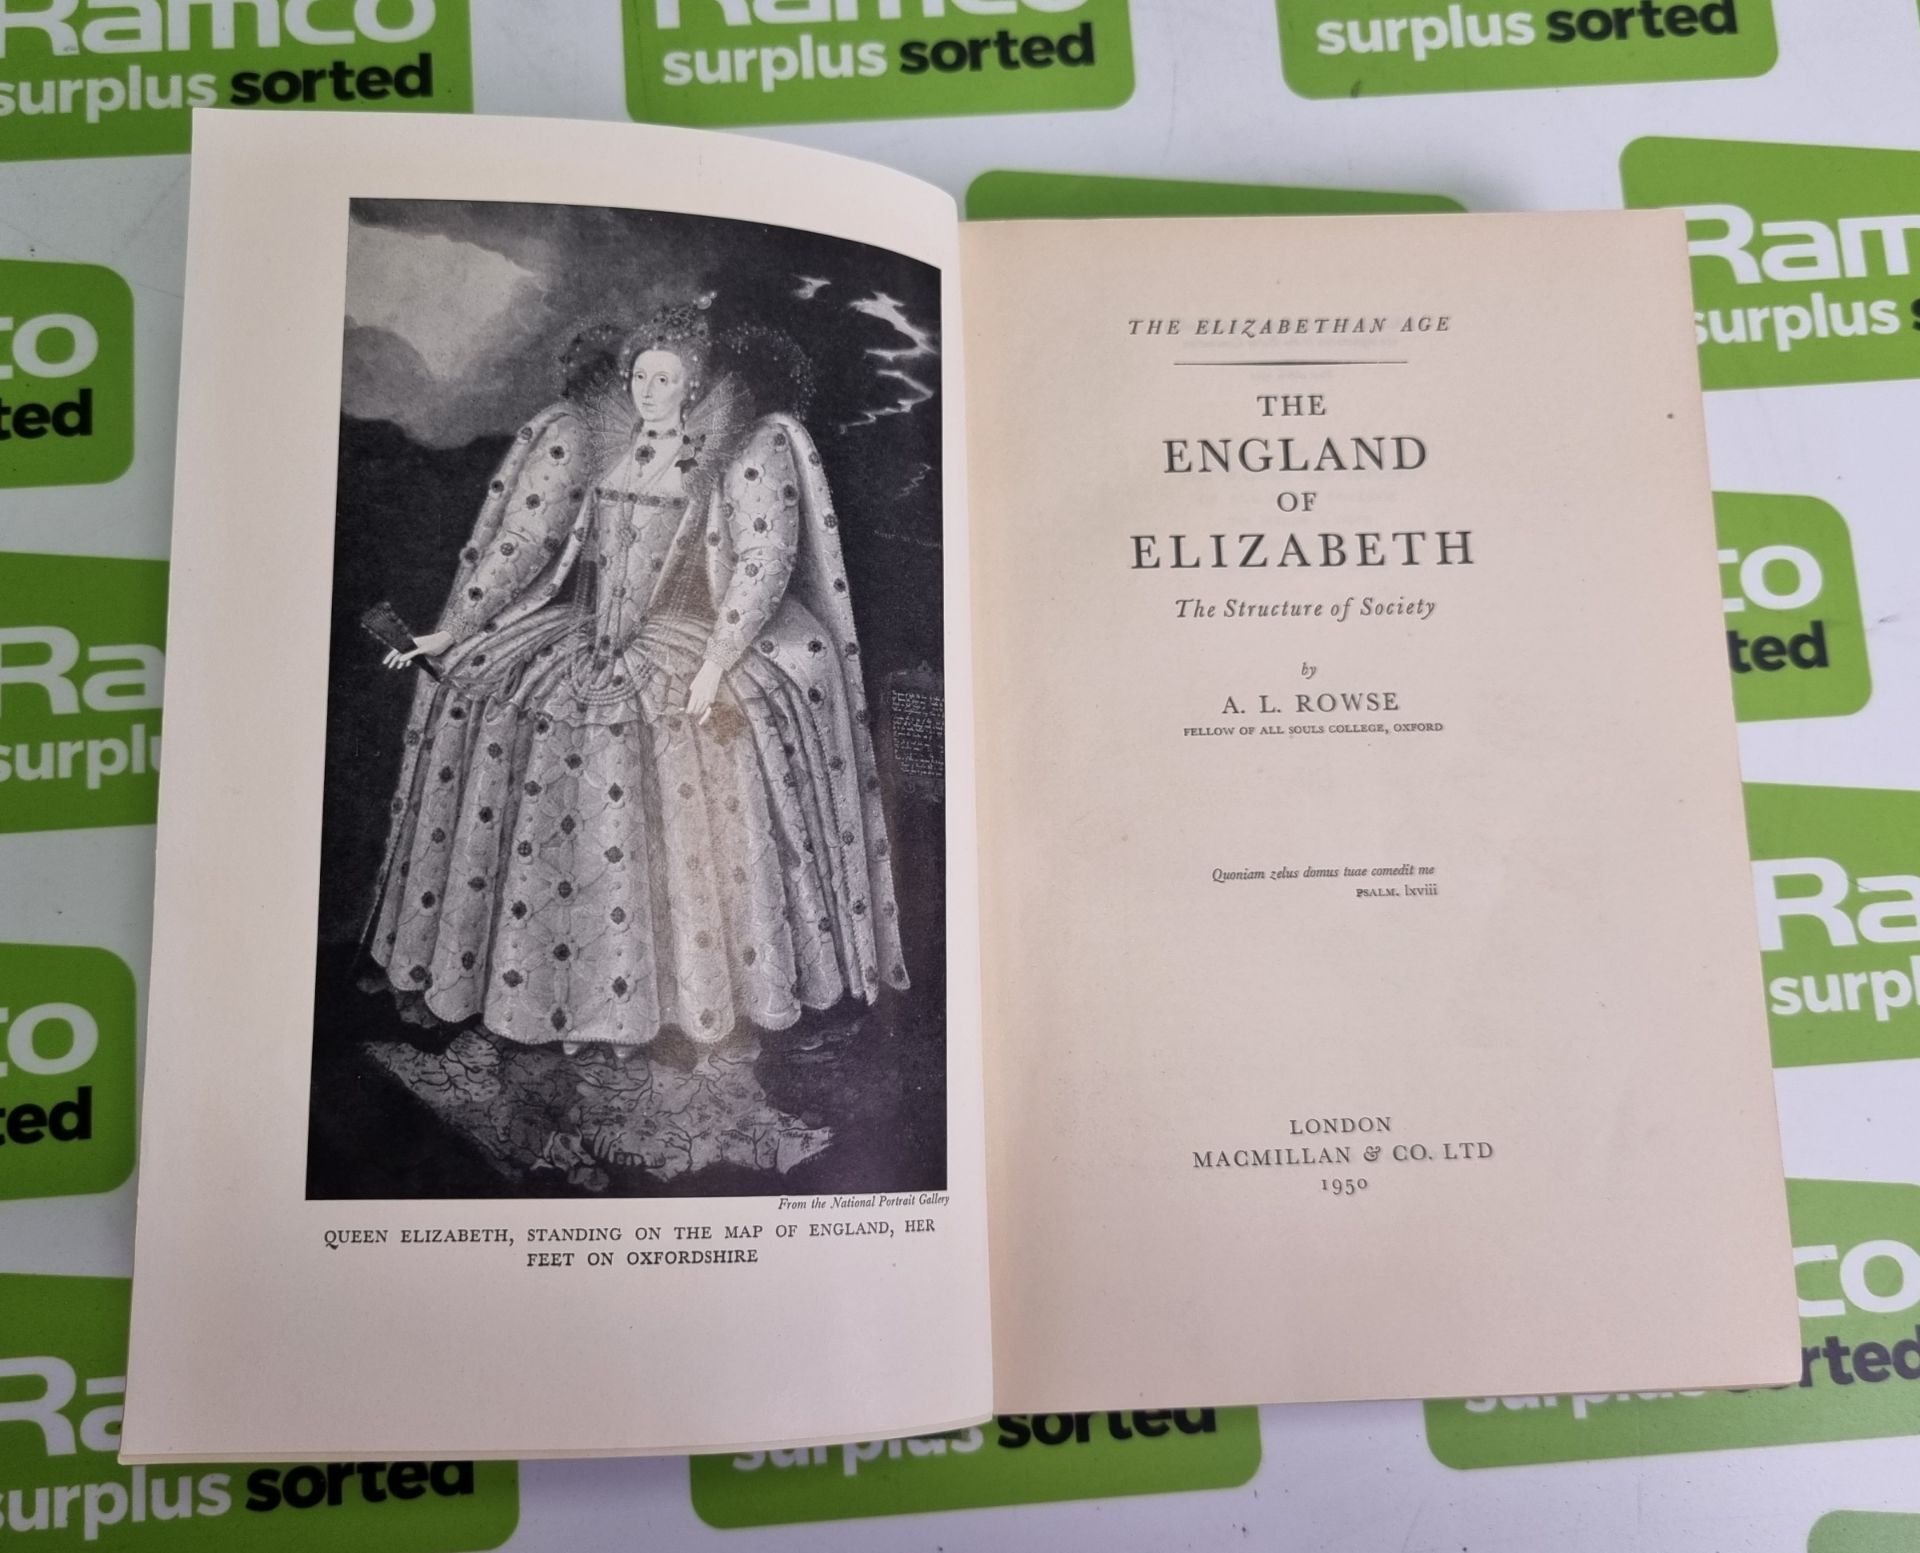 The Expansion of Elizabethan England : A.L.Rowse - London 1955, The England of Elizabeth : A.L.Rowse - Image 3 of 9